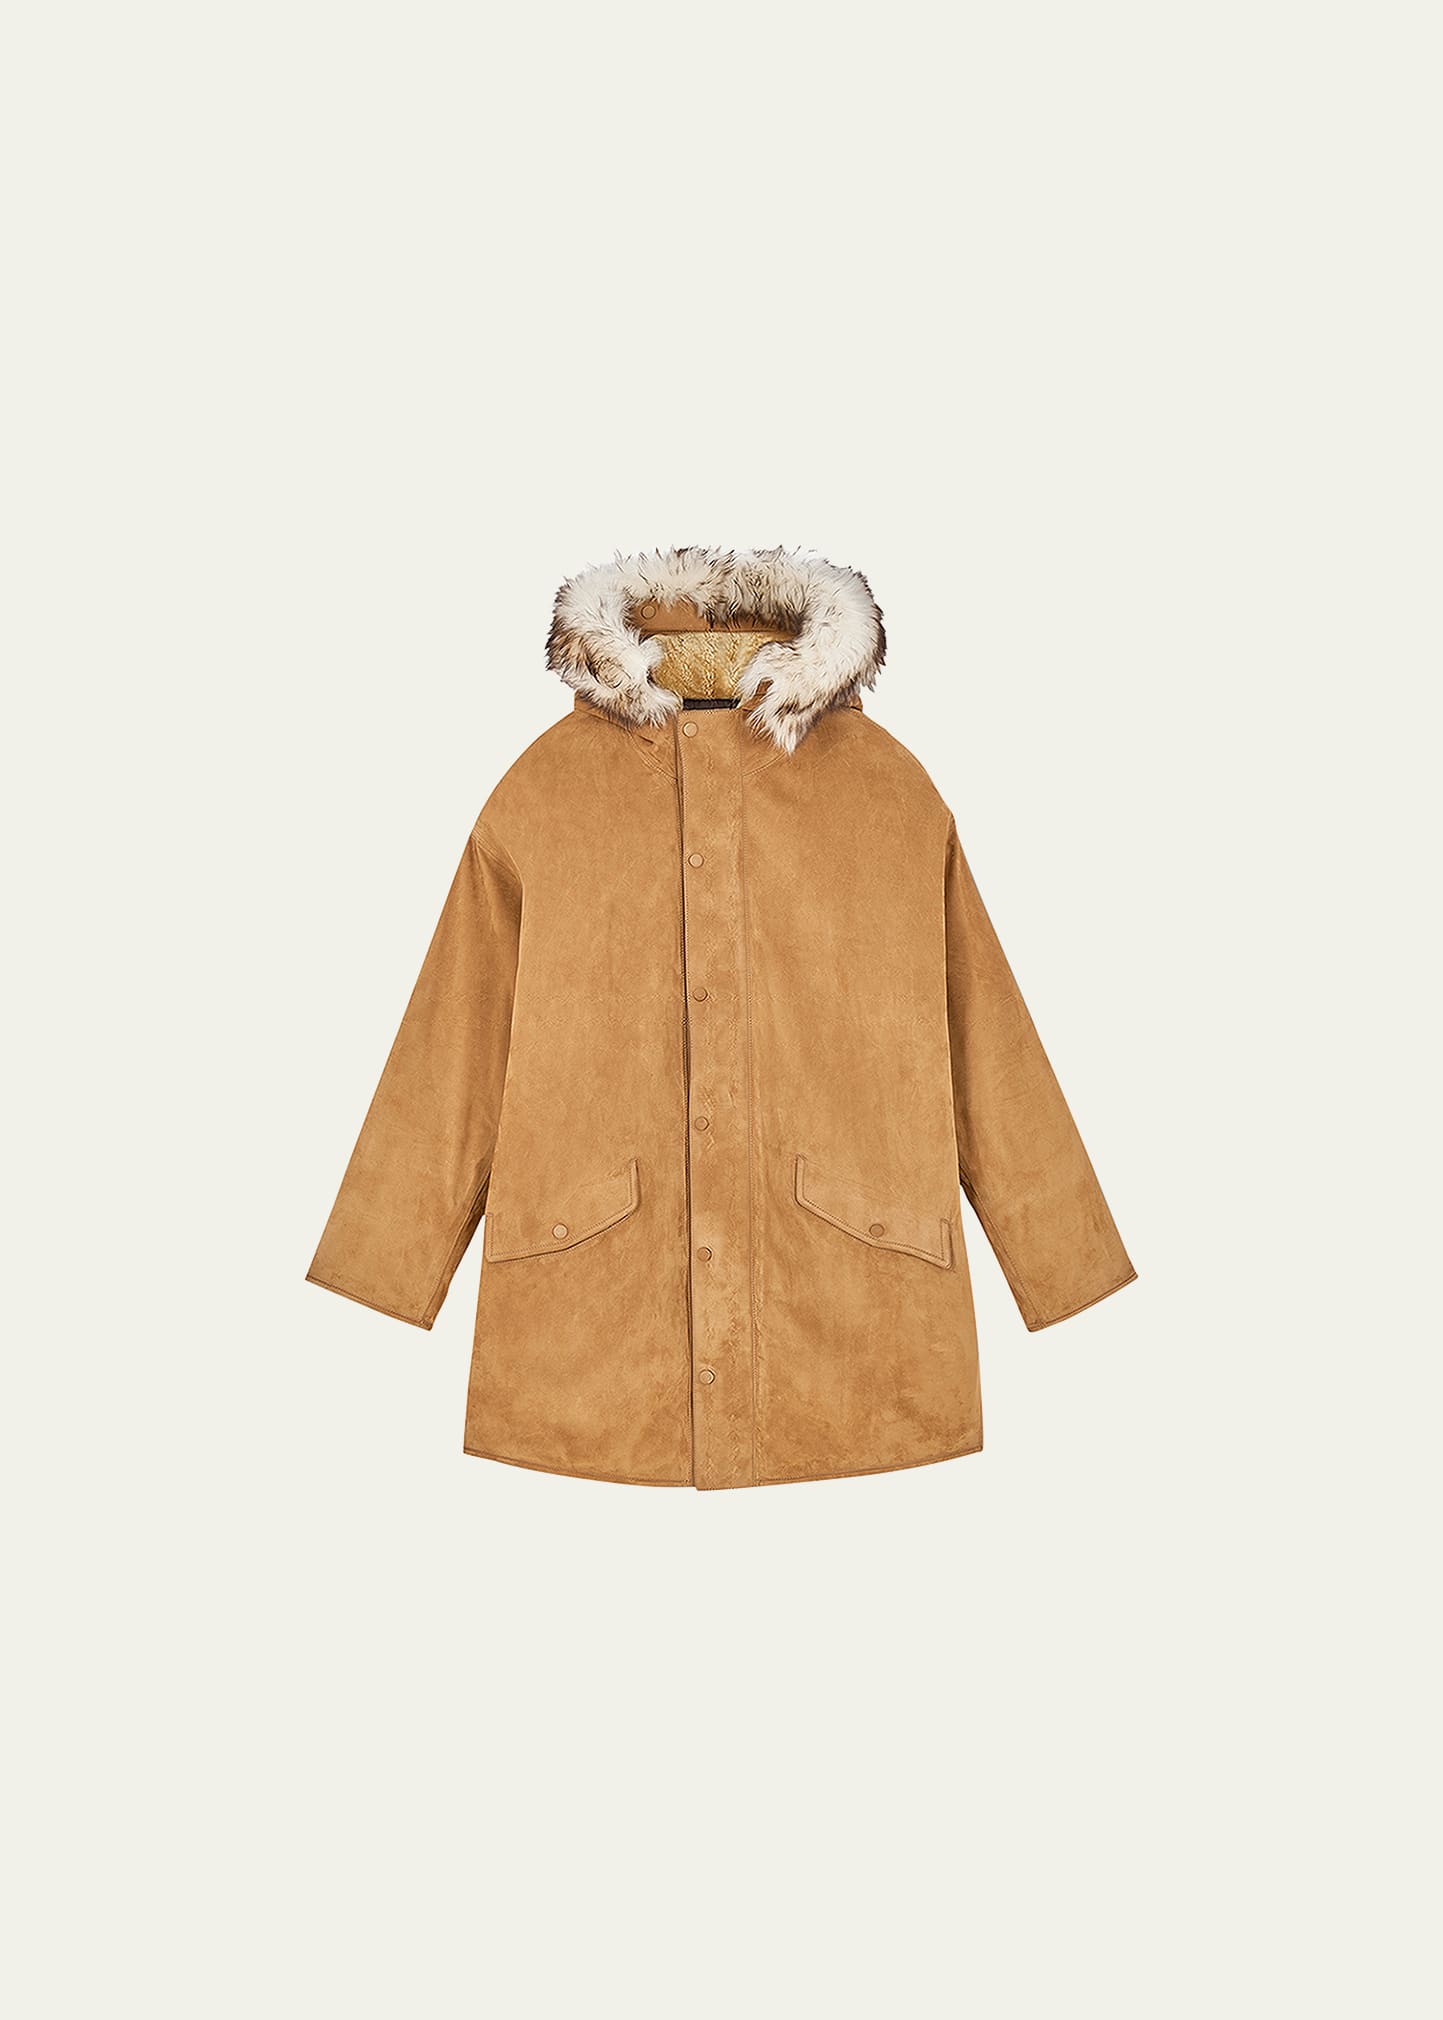 Men's Leather & Shearling Hooded Parka